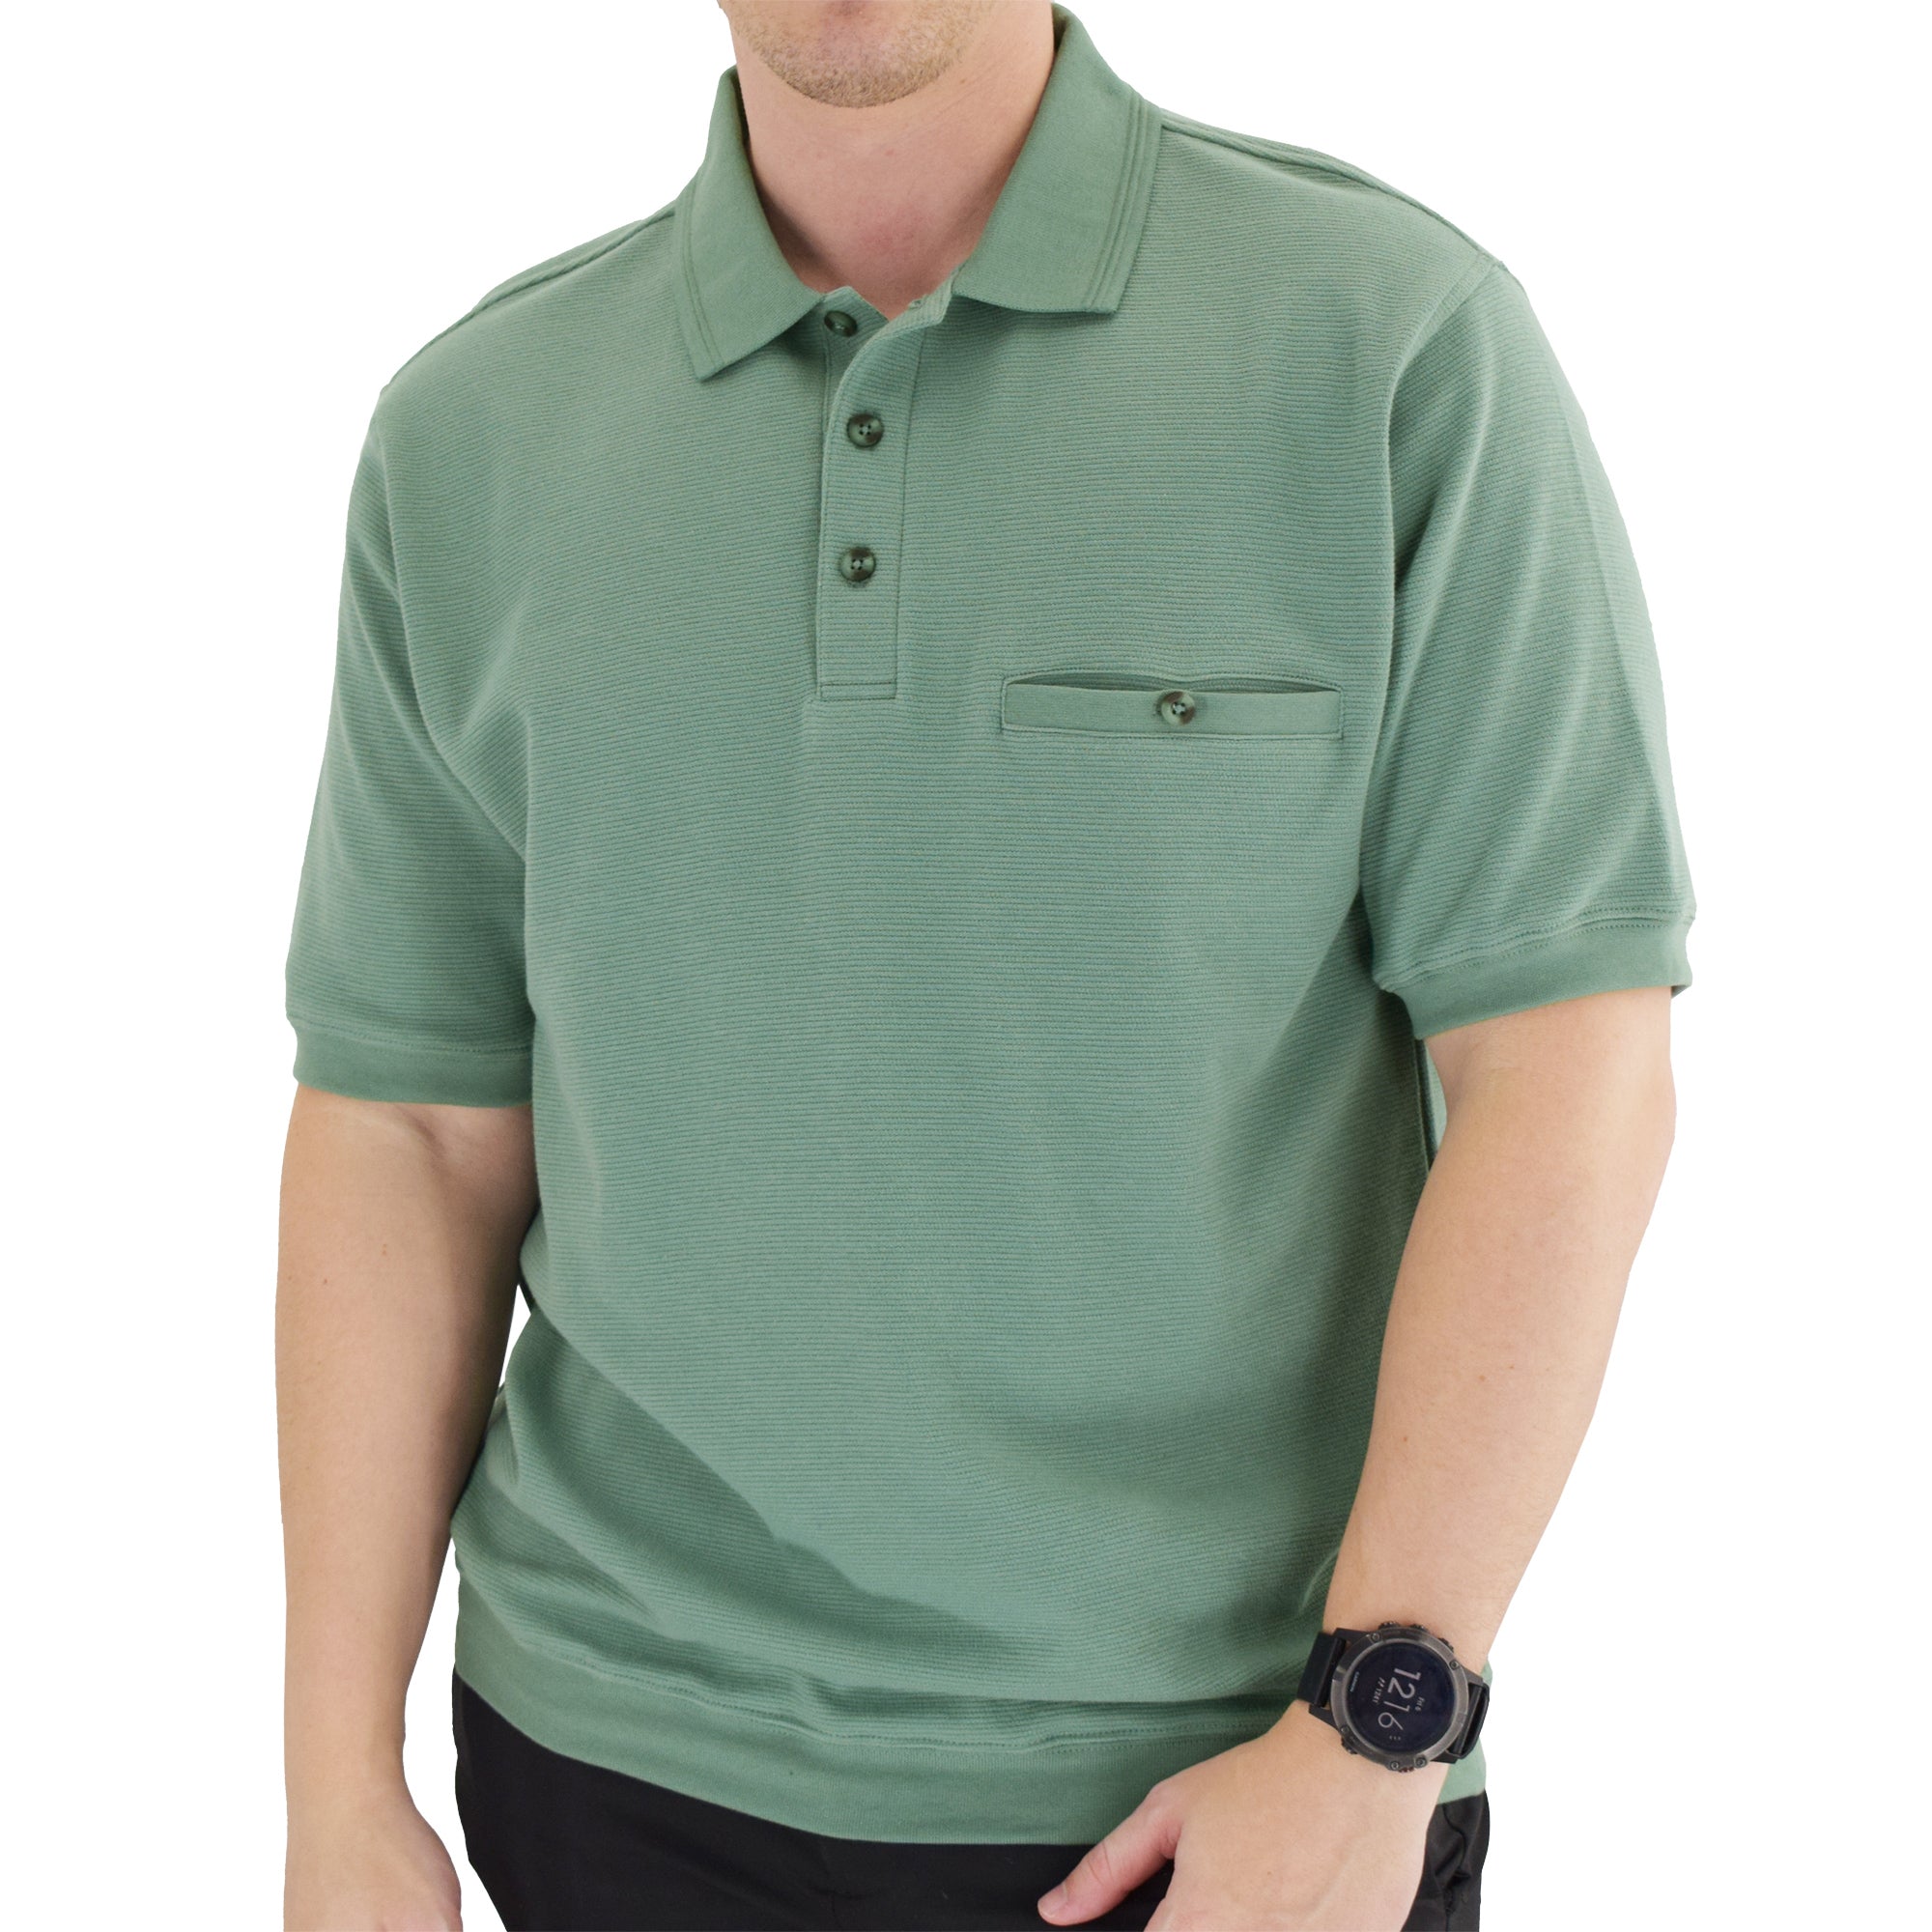 Classics by Palmland Short Sleeve 3 Button Banded Bottom Knit Collar 6070-100-Sage - theflagshirt